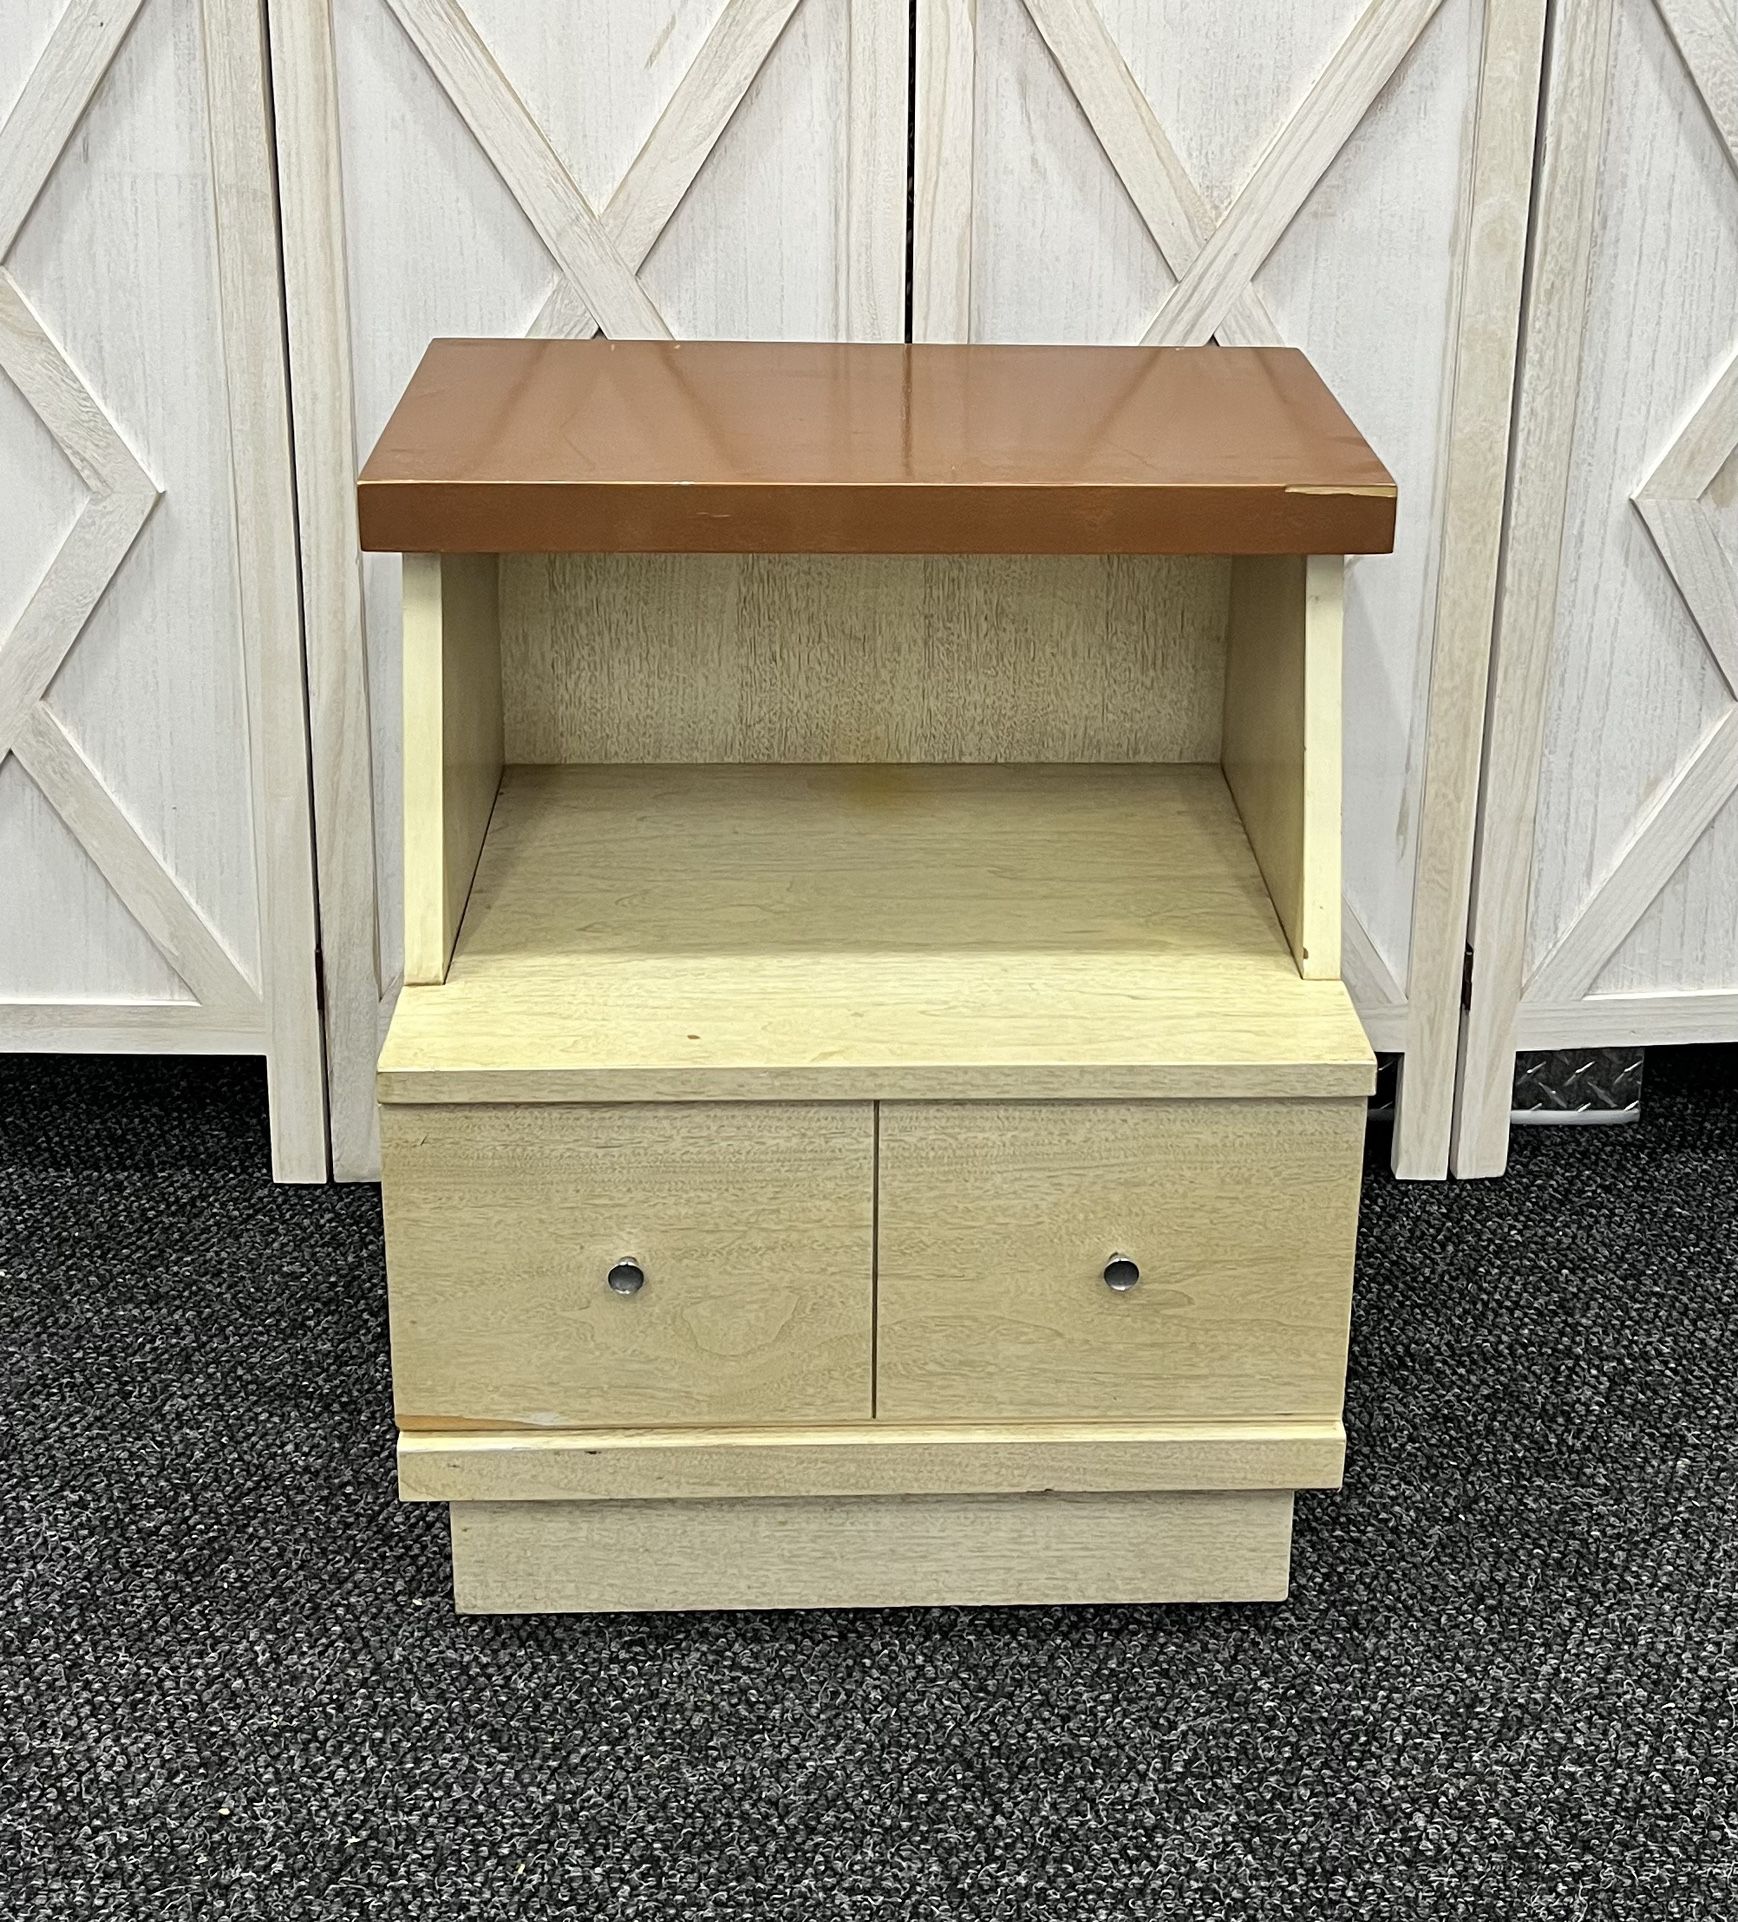 Free Delivery 🚚 Vintage Furniture Co. Nightstand (Value $850) 21"W x 16”D x 26"H